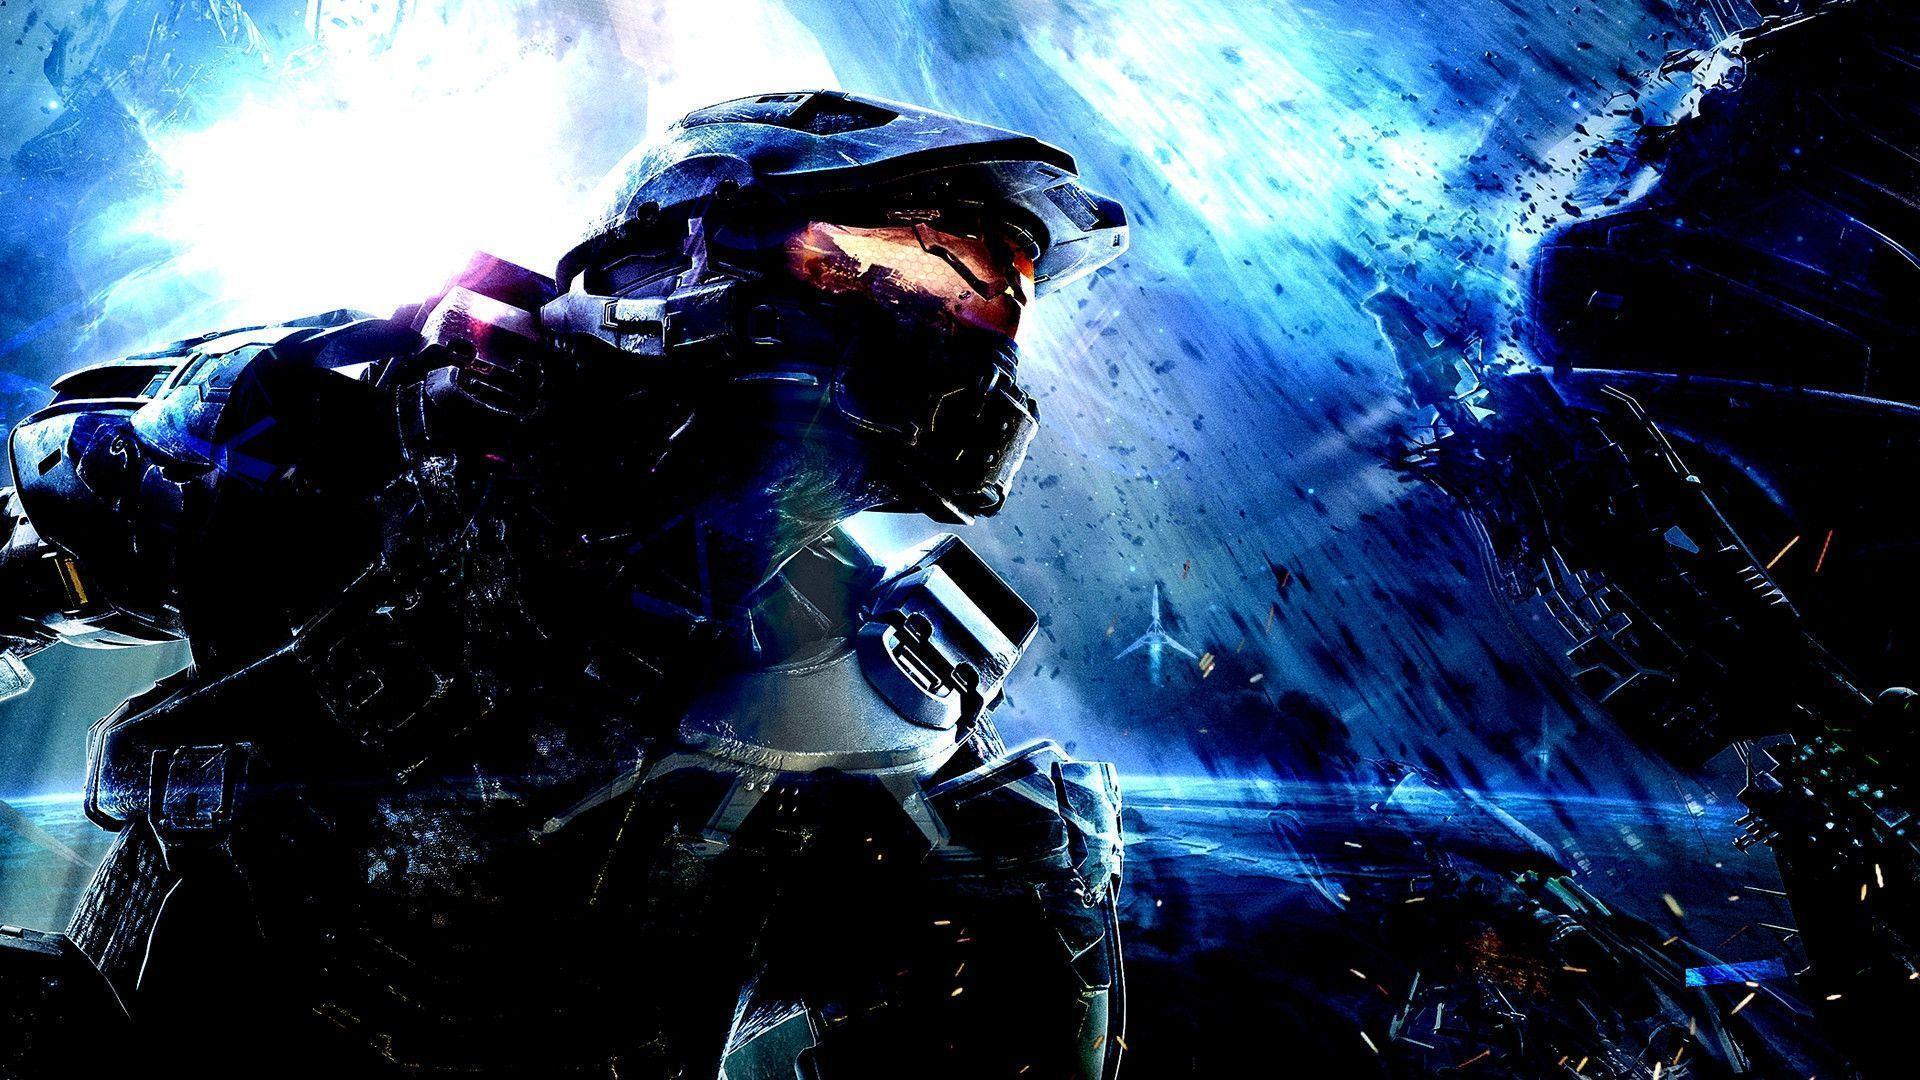 Free Download Hd Halo Wallpapers X For Your Desktop Mobile Tablet Explore